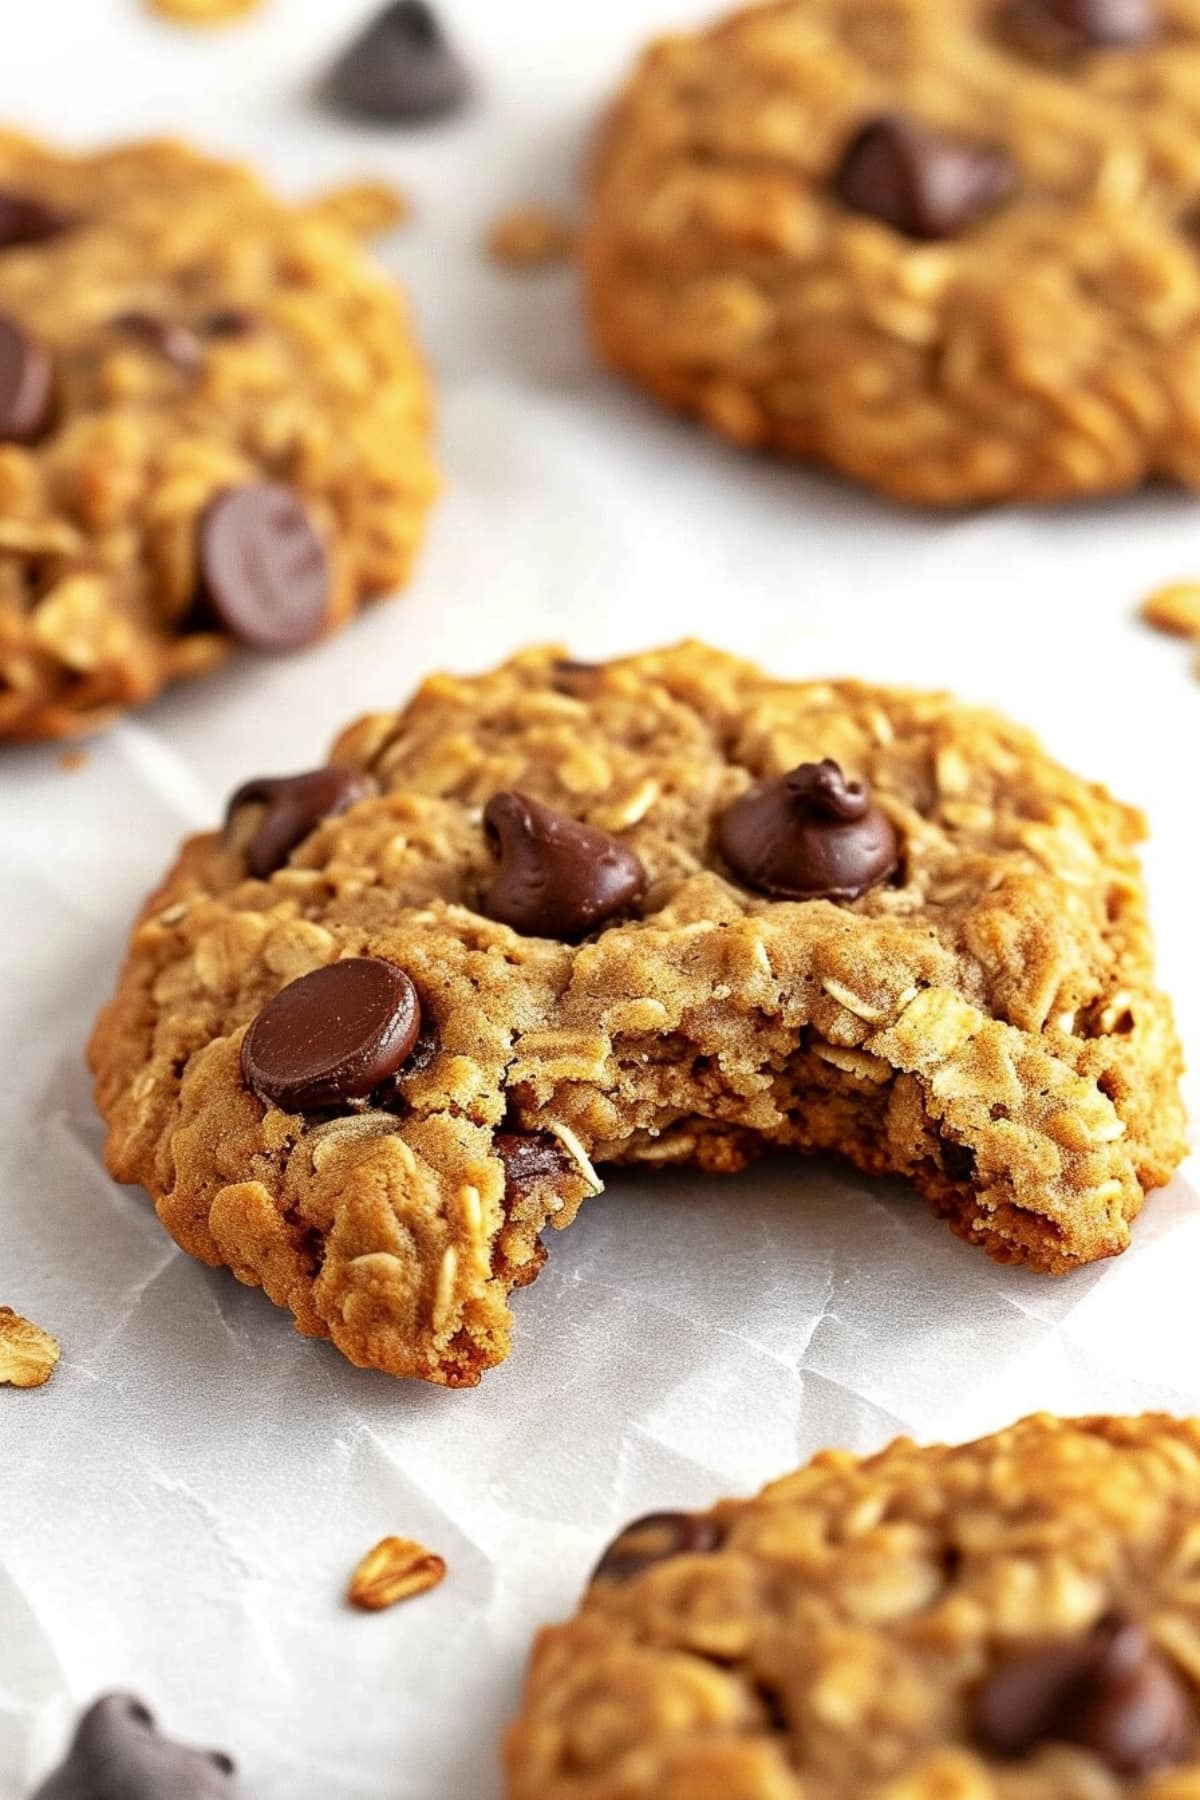 Golden brown and chewy chocolate chip oatmeal cookies. Perfect baked and irresistible.